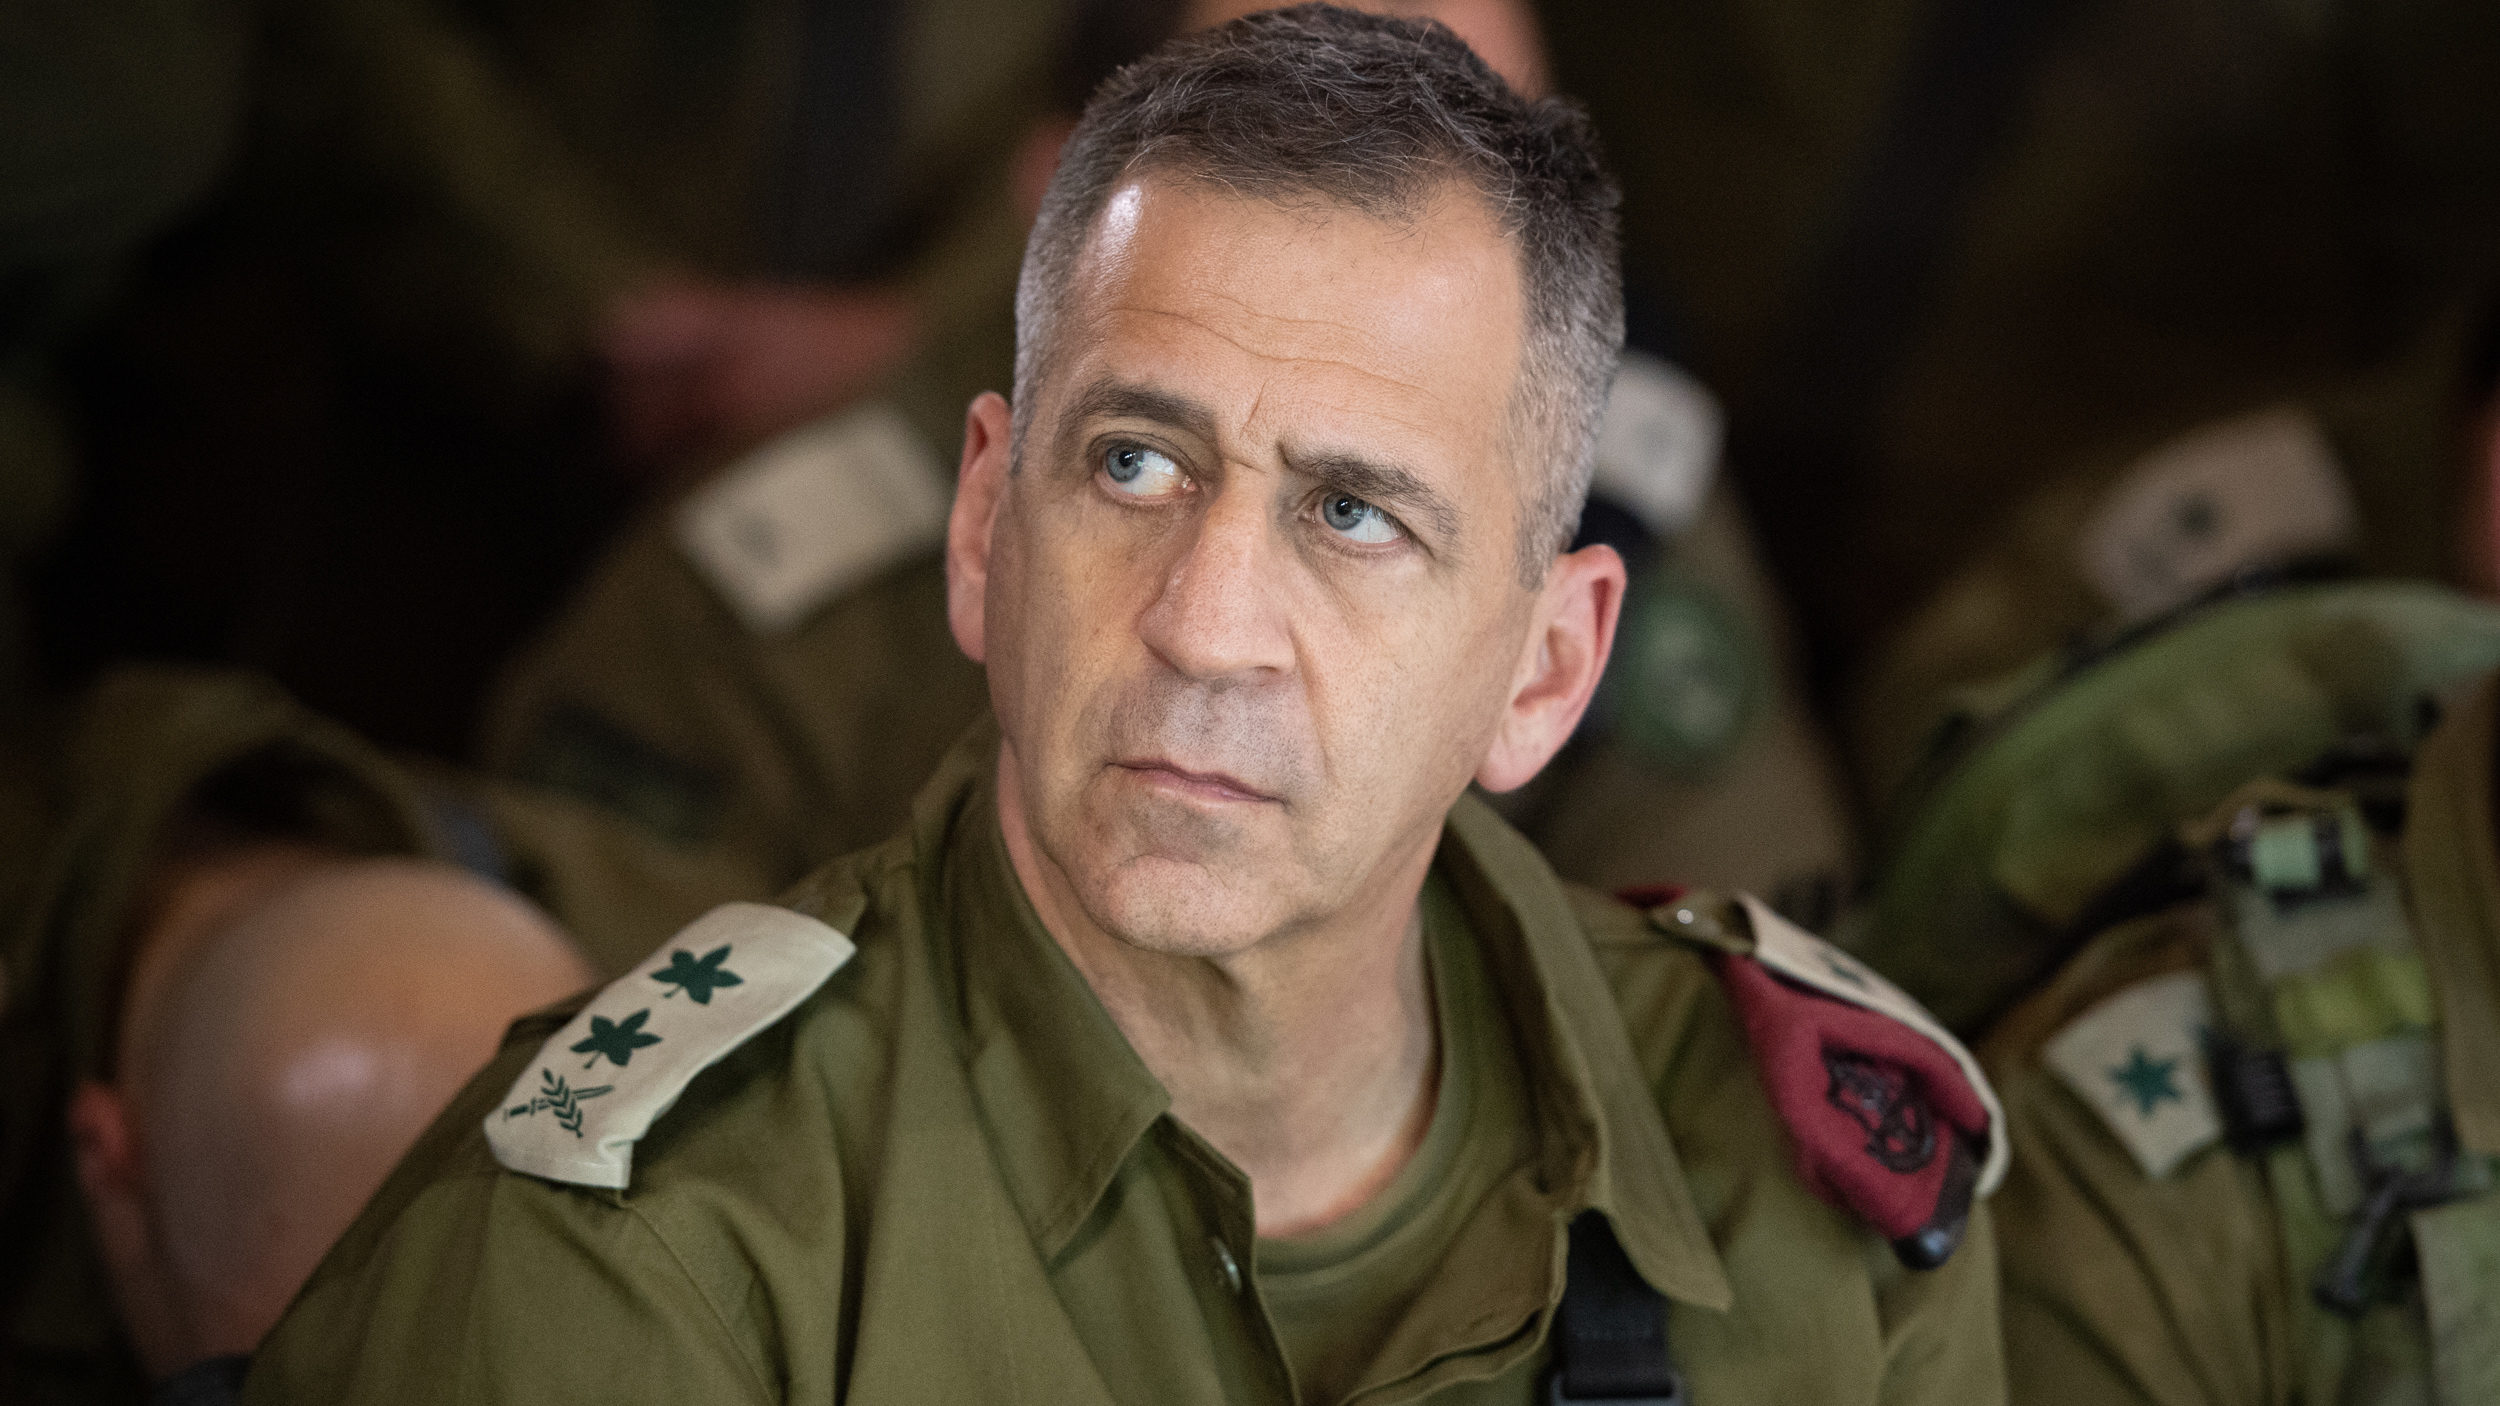 Israel’s Military Chief in US Warns Against Iran Nuclear Deal